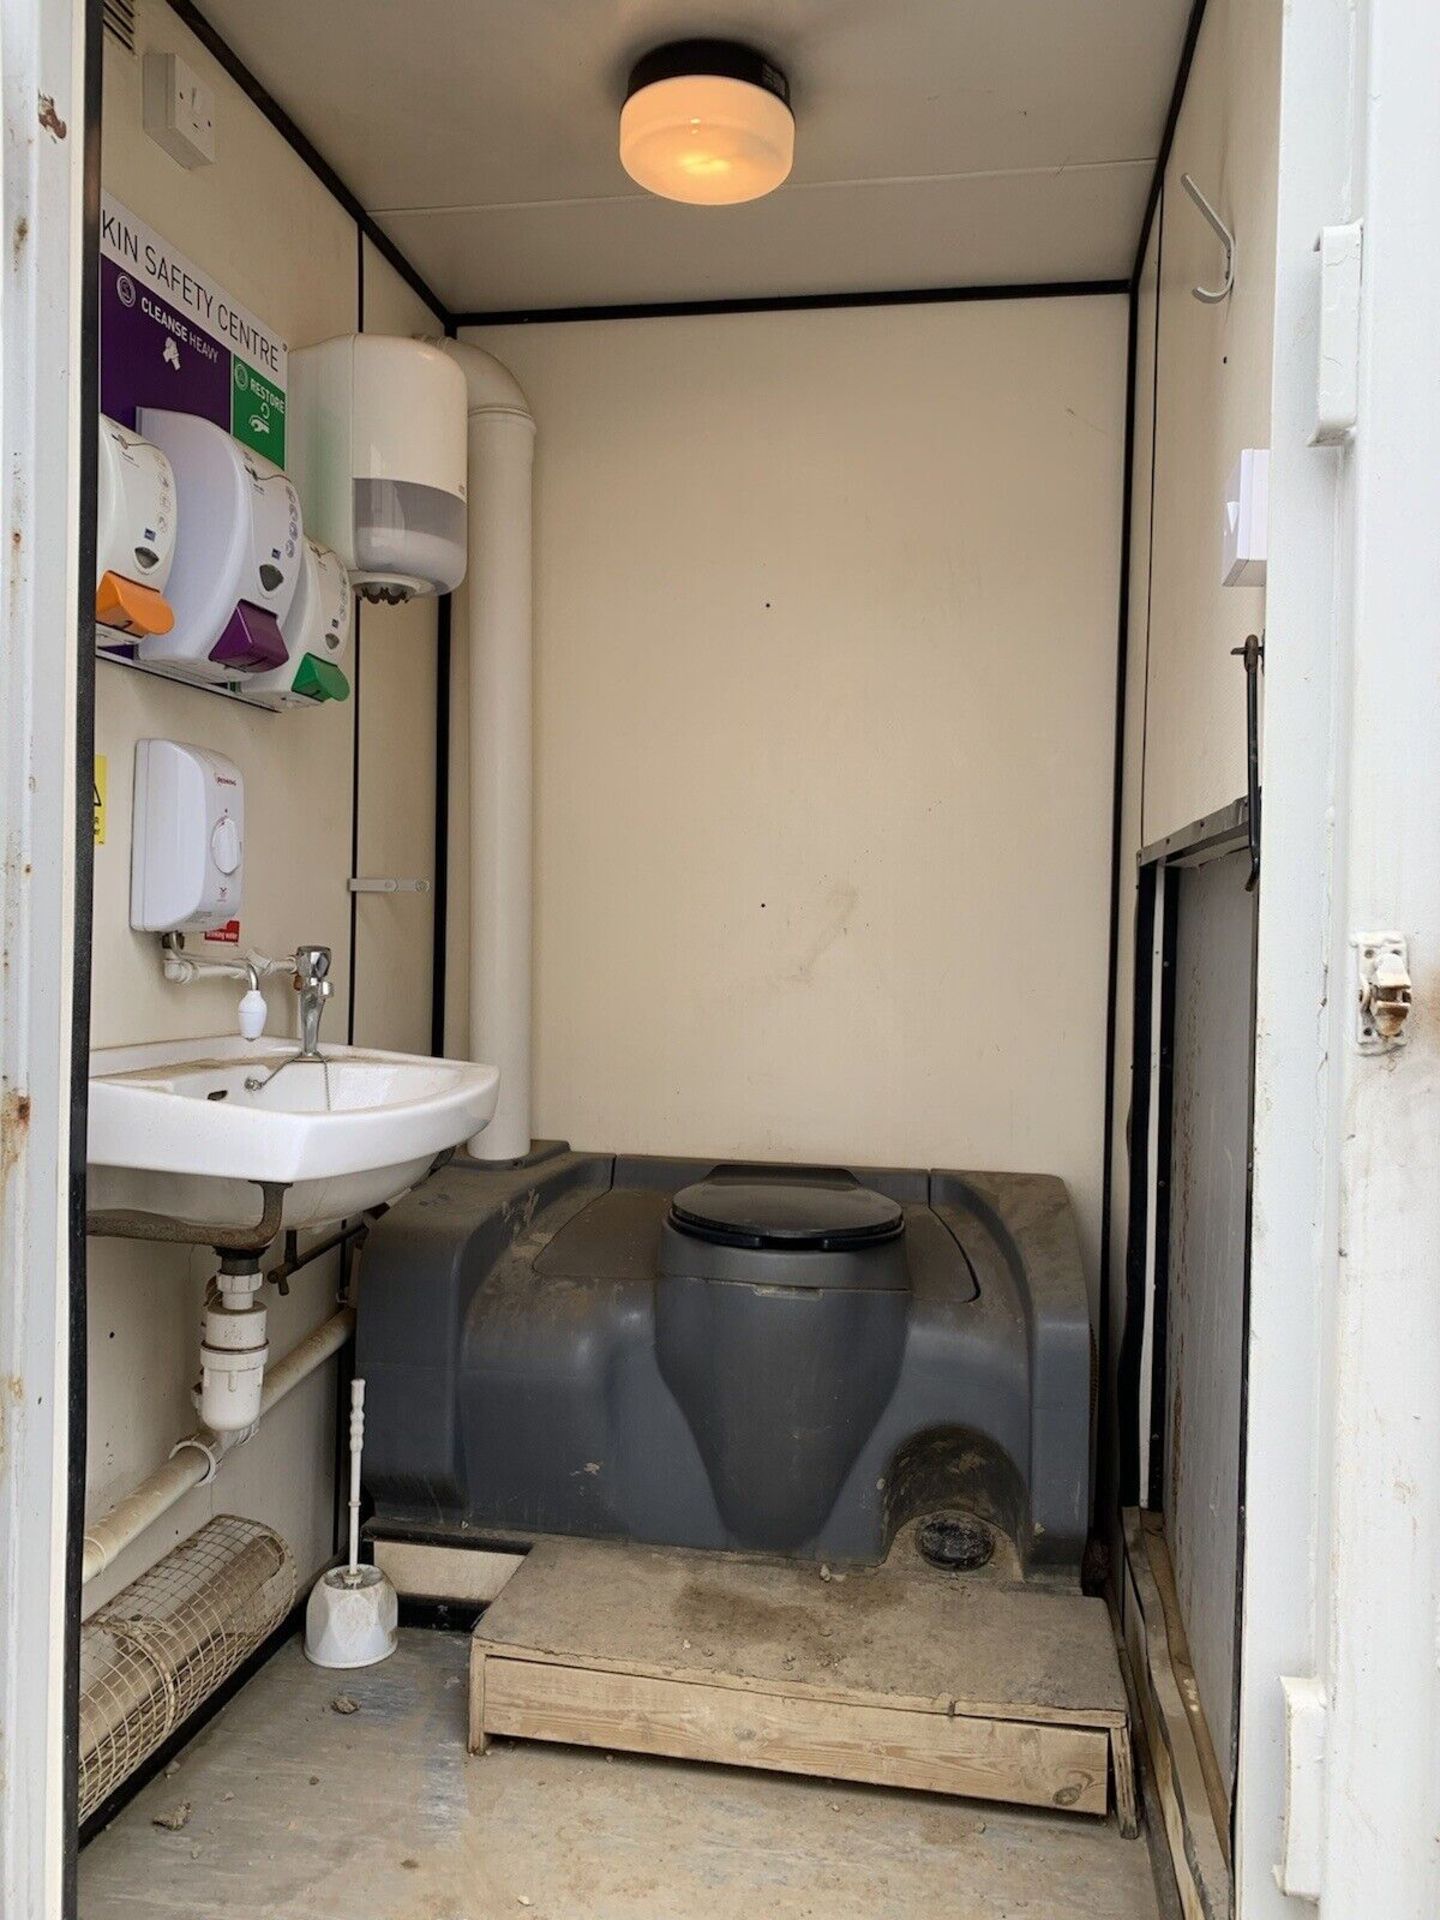 Portable Office Site Cabin Canteen Welfare Unit Toilet Generator Anti Vandal - Image 2 of 8